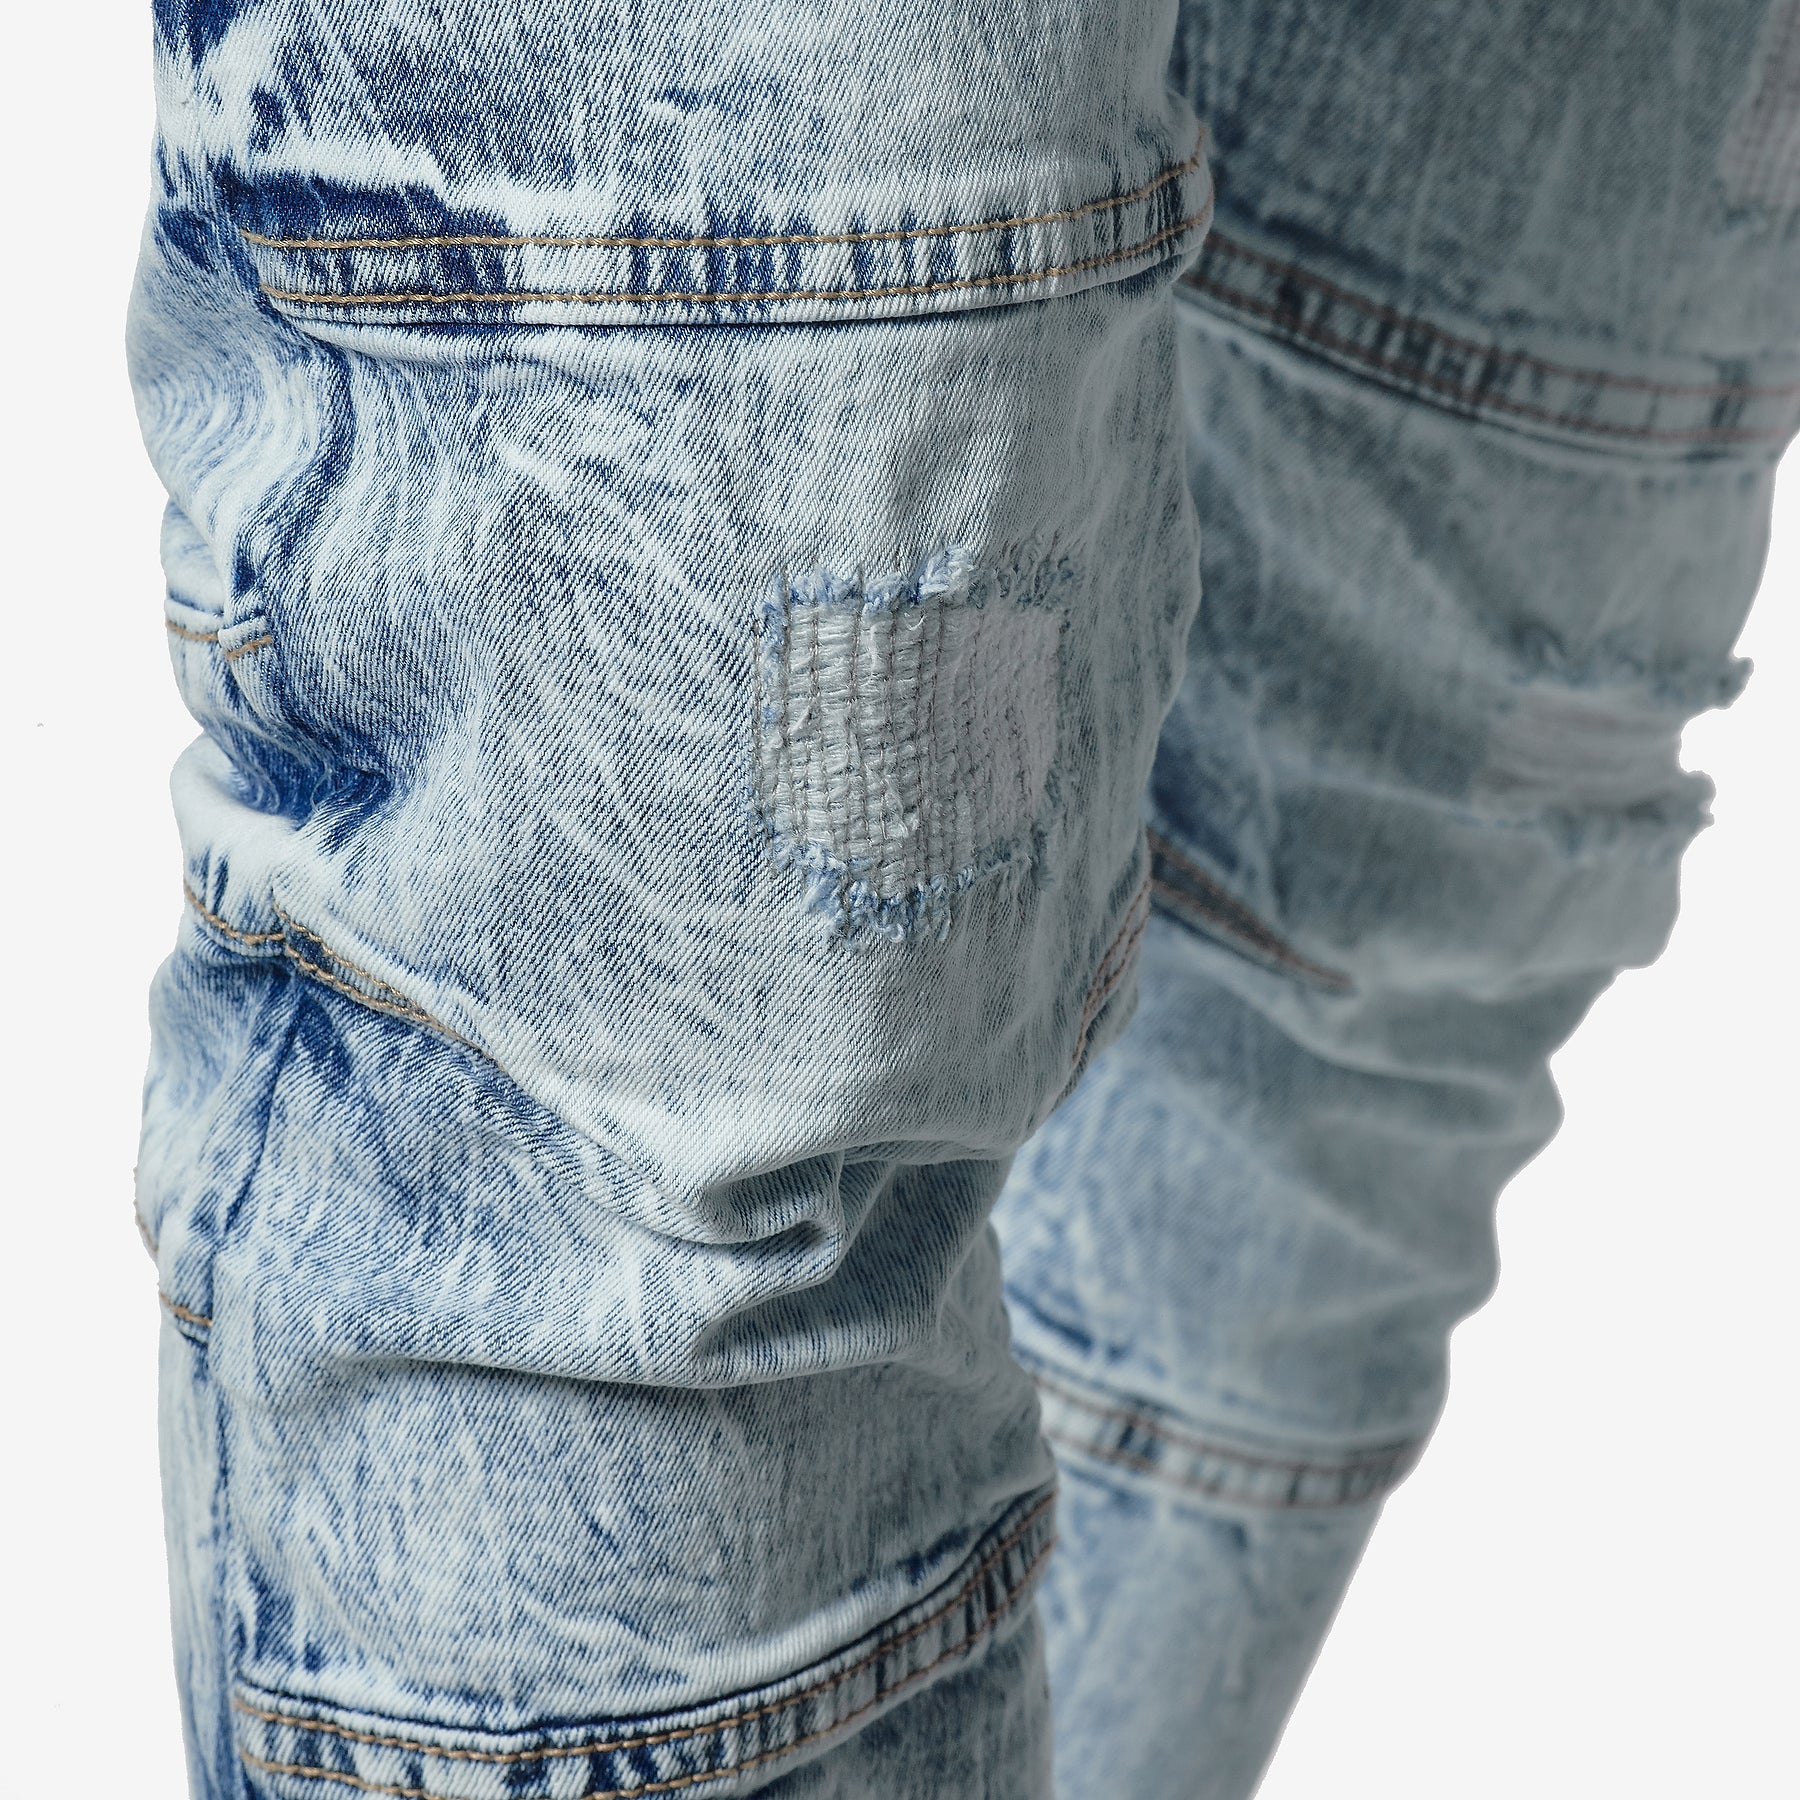 ICE BLUE JEANS WITH CELLPHONE POCKETS